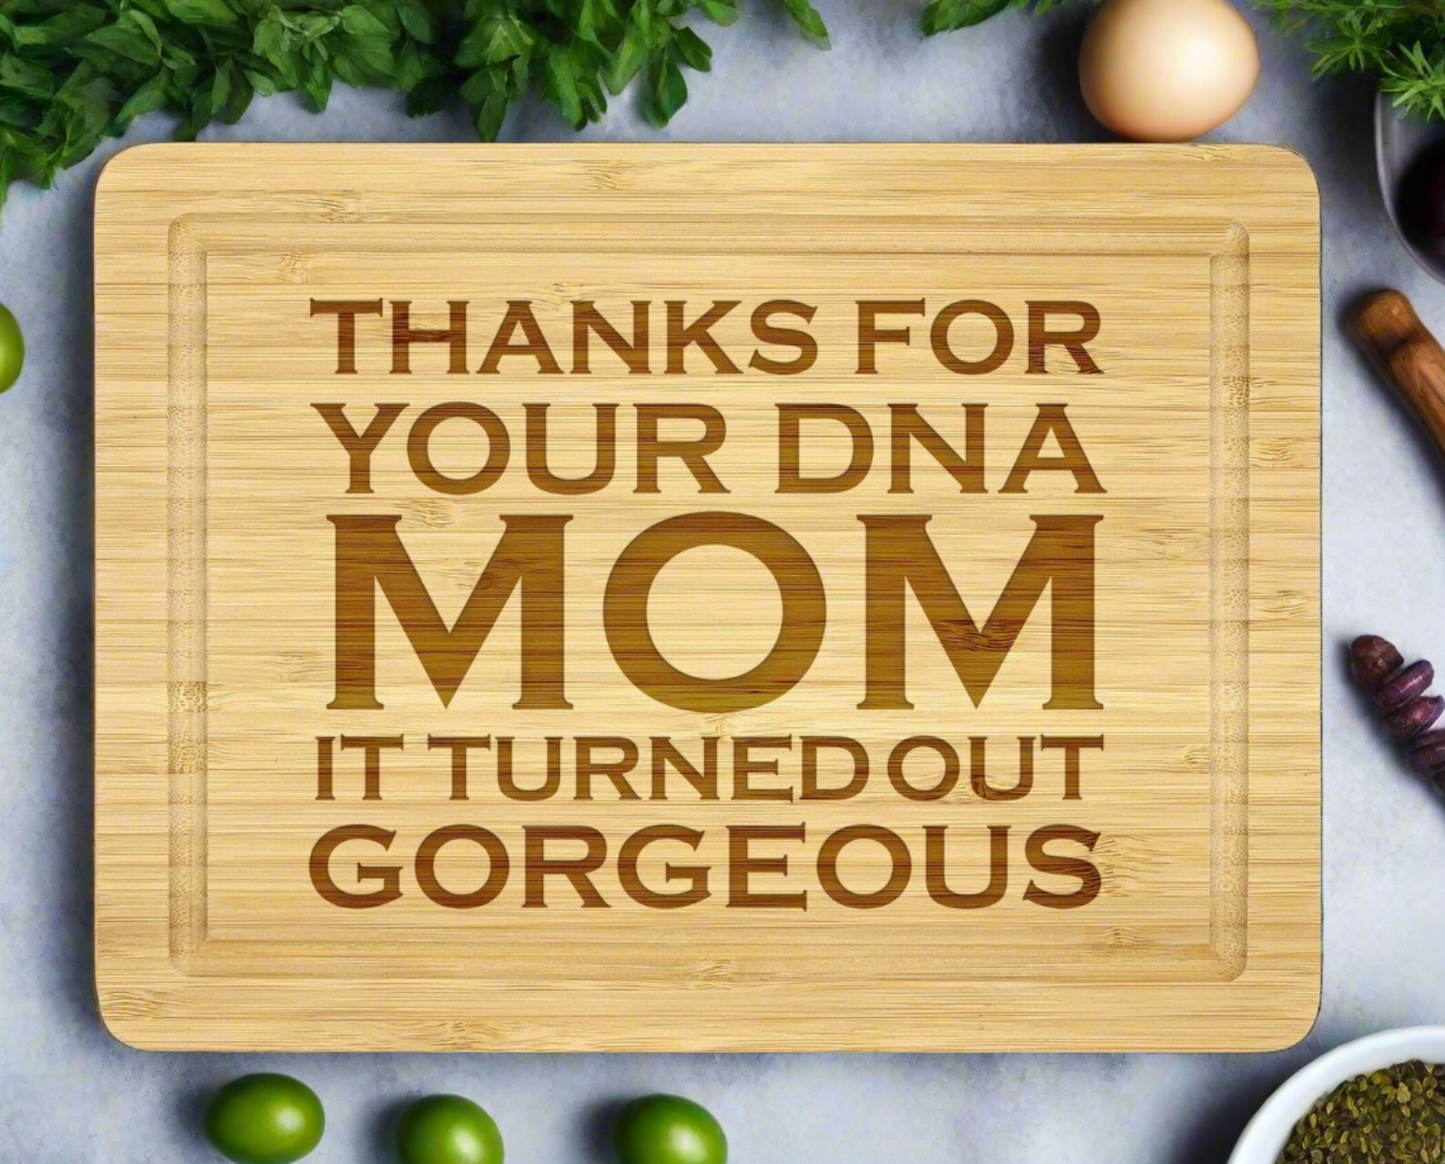 "Thanks For Your DNA" Cutting Board: A Unique and Thoughtful Gift for Mom